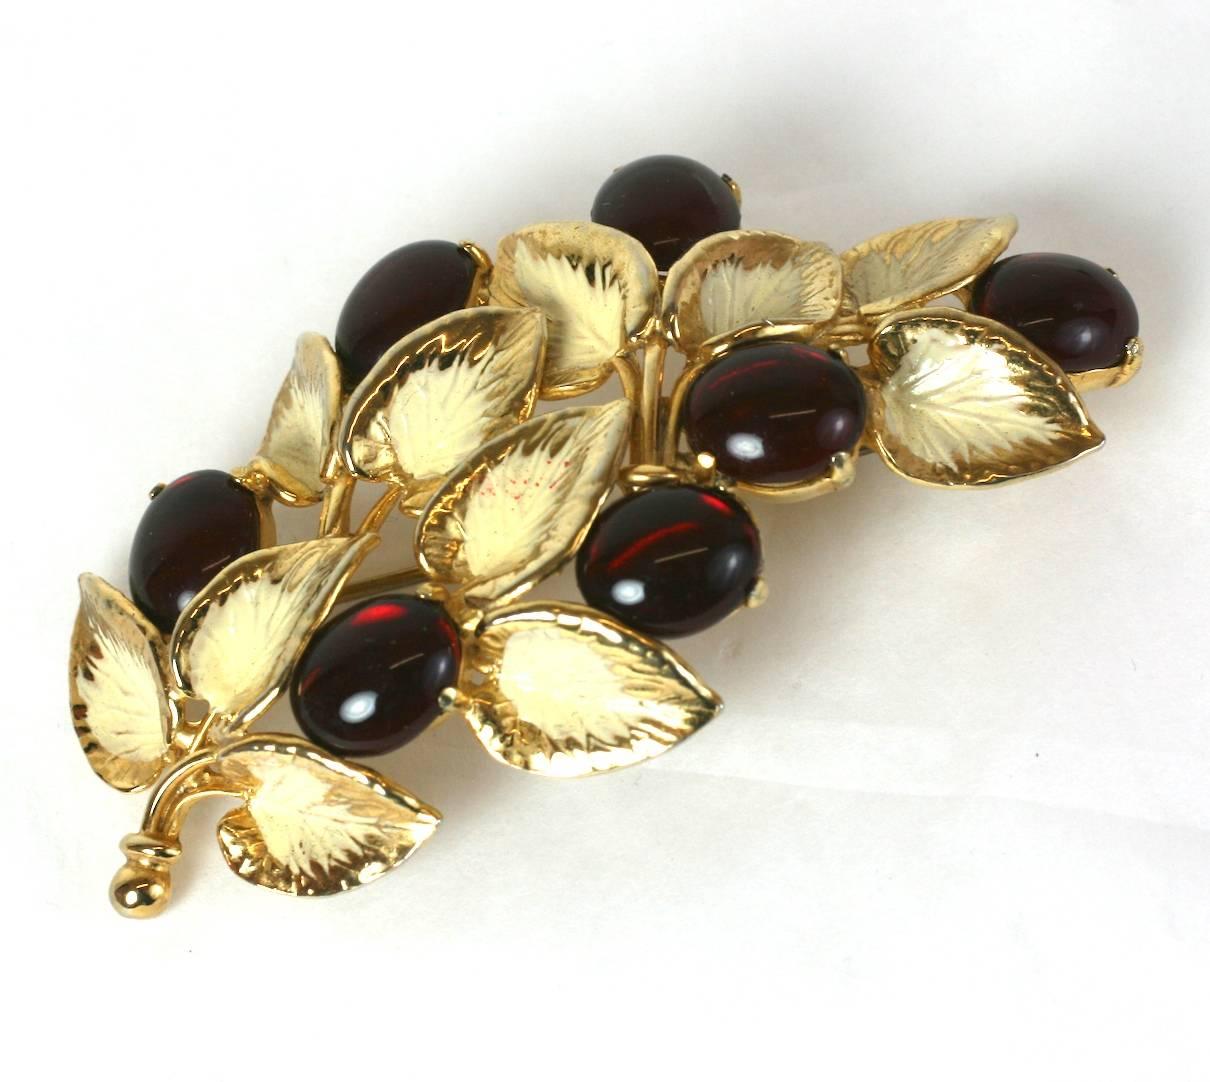 Schiaparelli's lovely garnet pate de verre cabocheon naturalistic berry branch brooch. Of gilt metal and ivory colored cold enamel.
Excellent Condition, Length 3.50